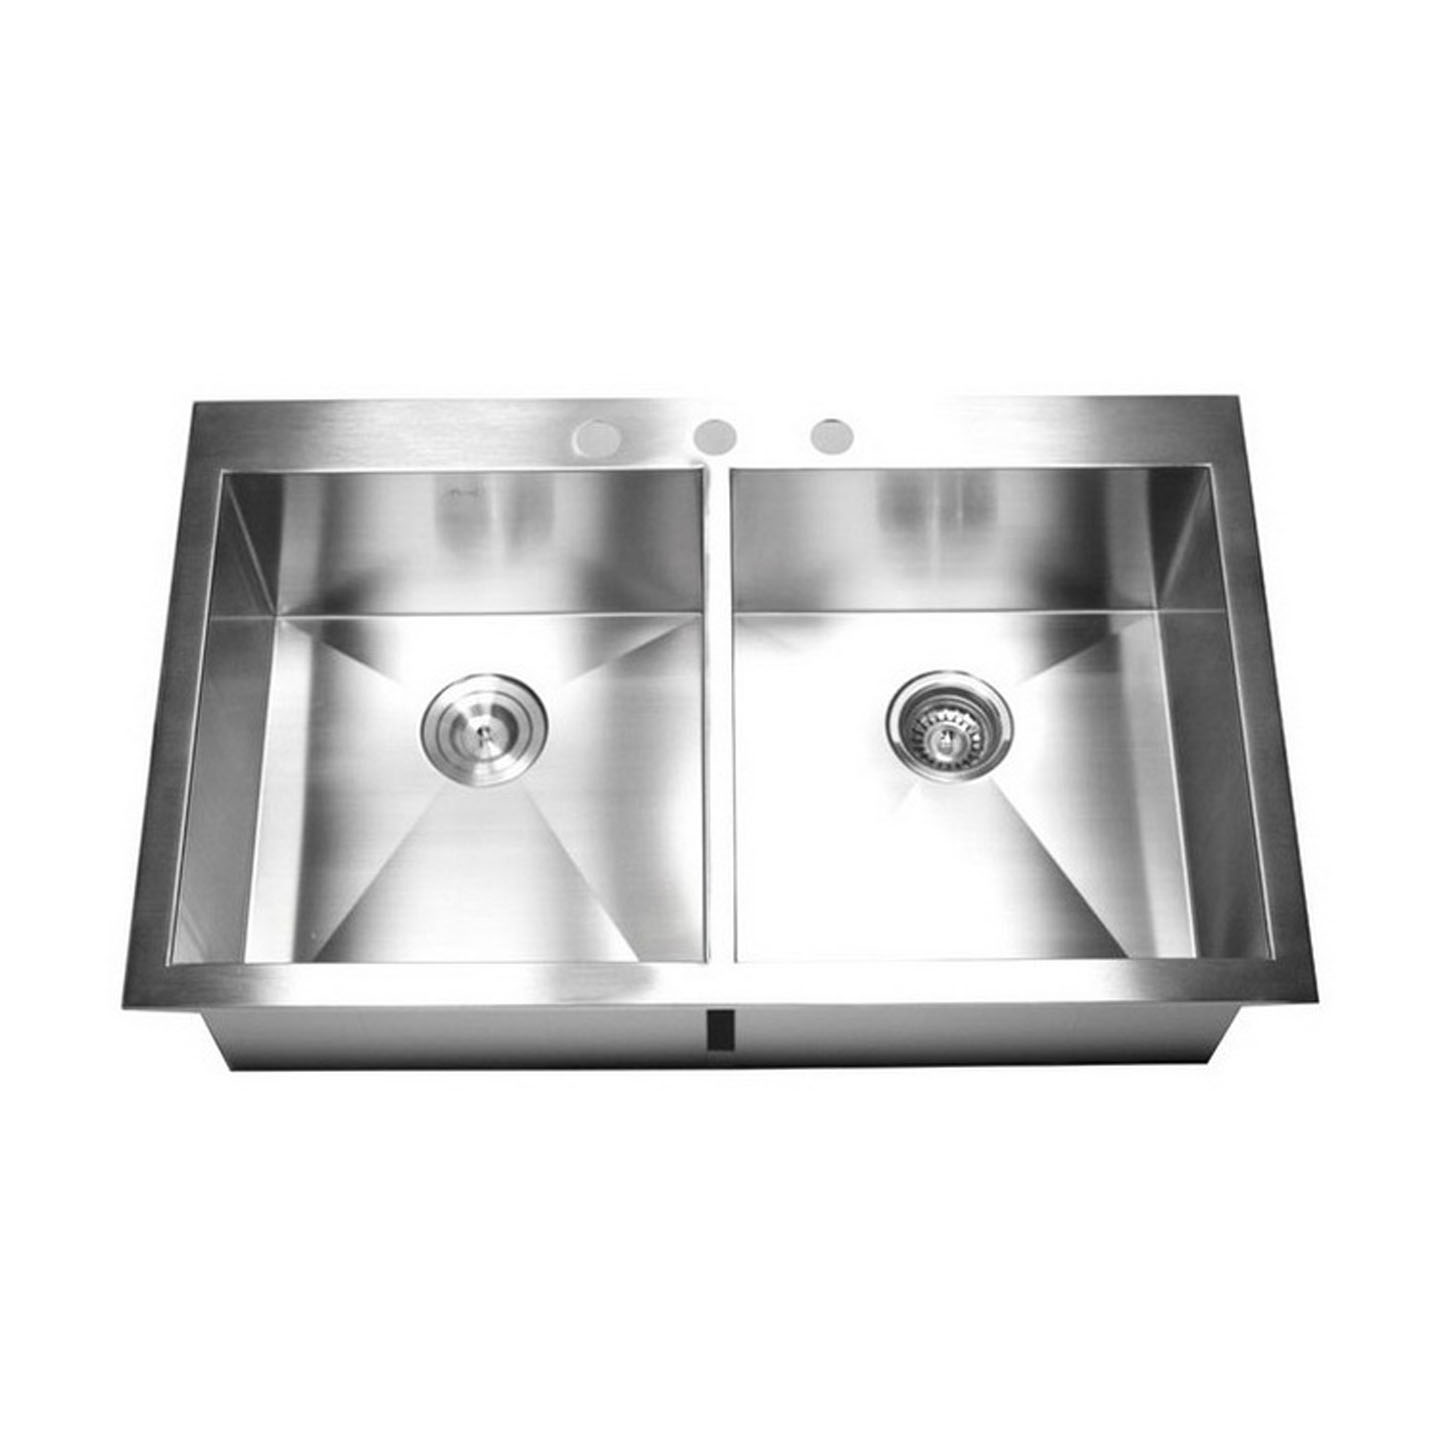 Stainless Steel Handmade Double Sink DST-3322